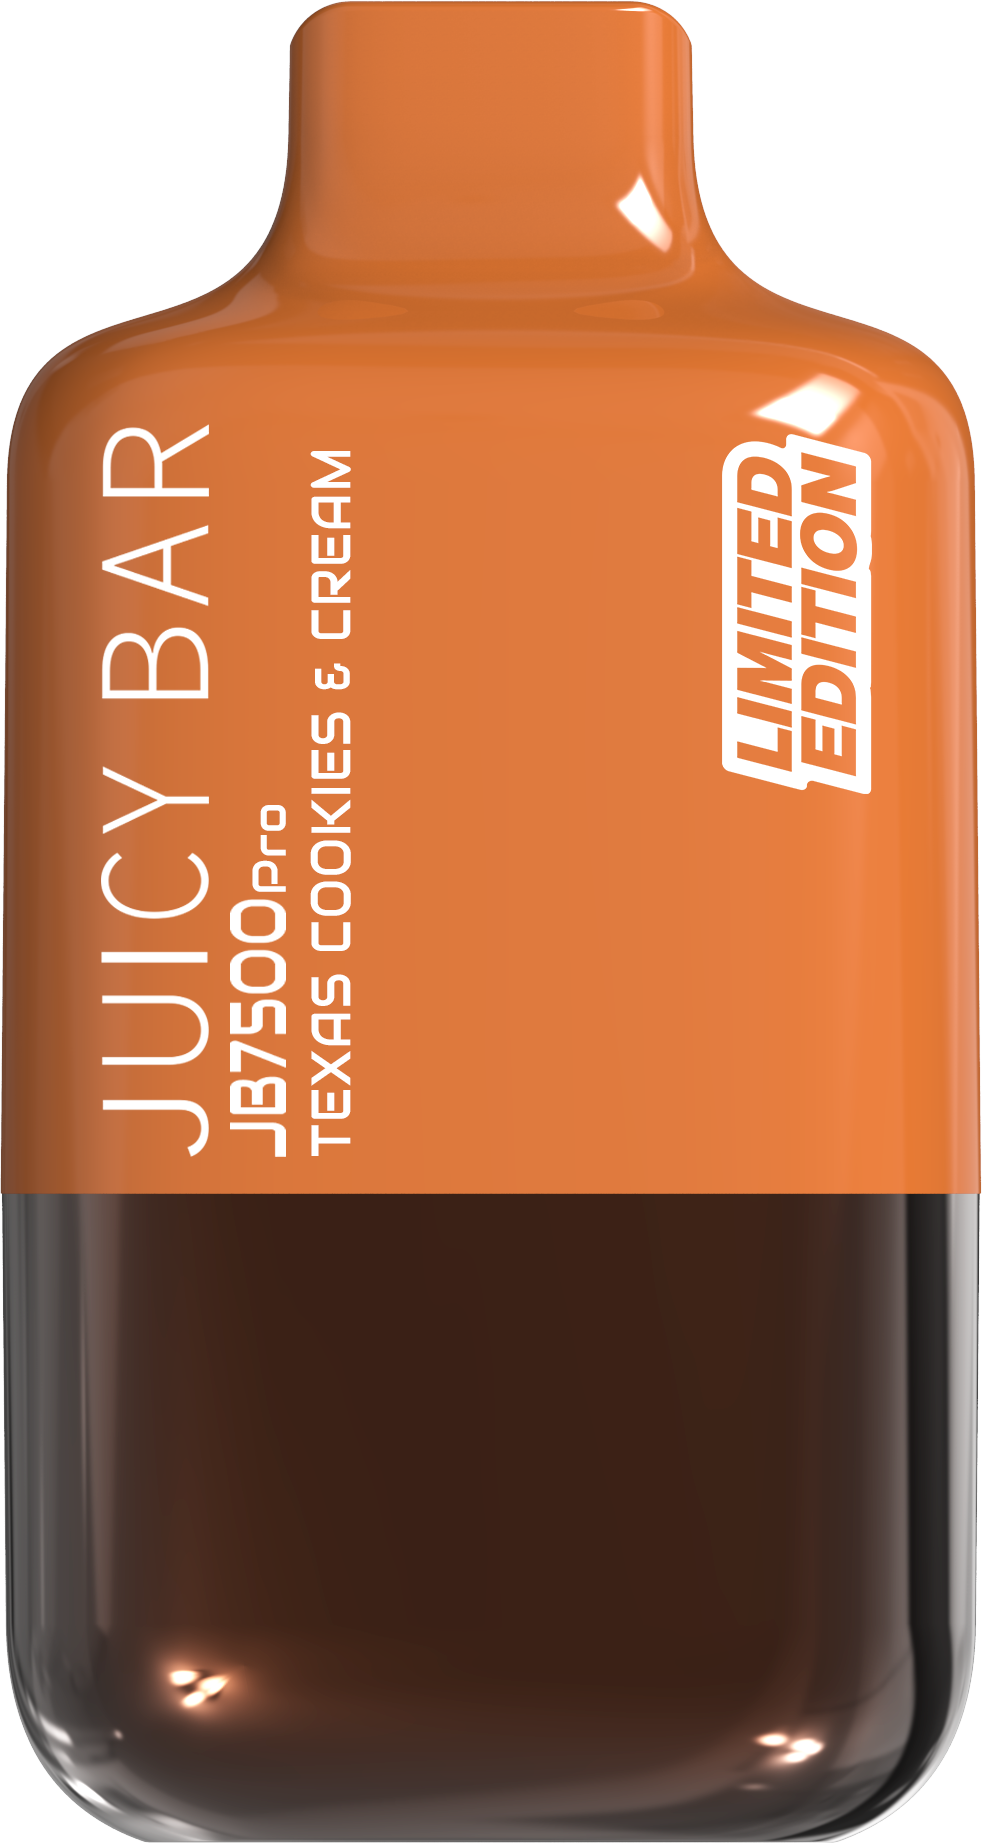 Juicy Bar Pro Edition 7500 Puffs 5% | Texas Cookies and Cream